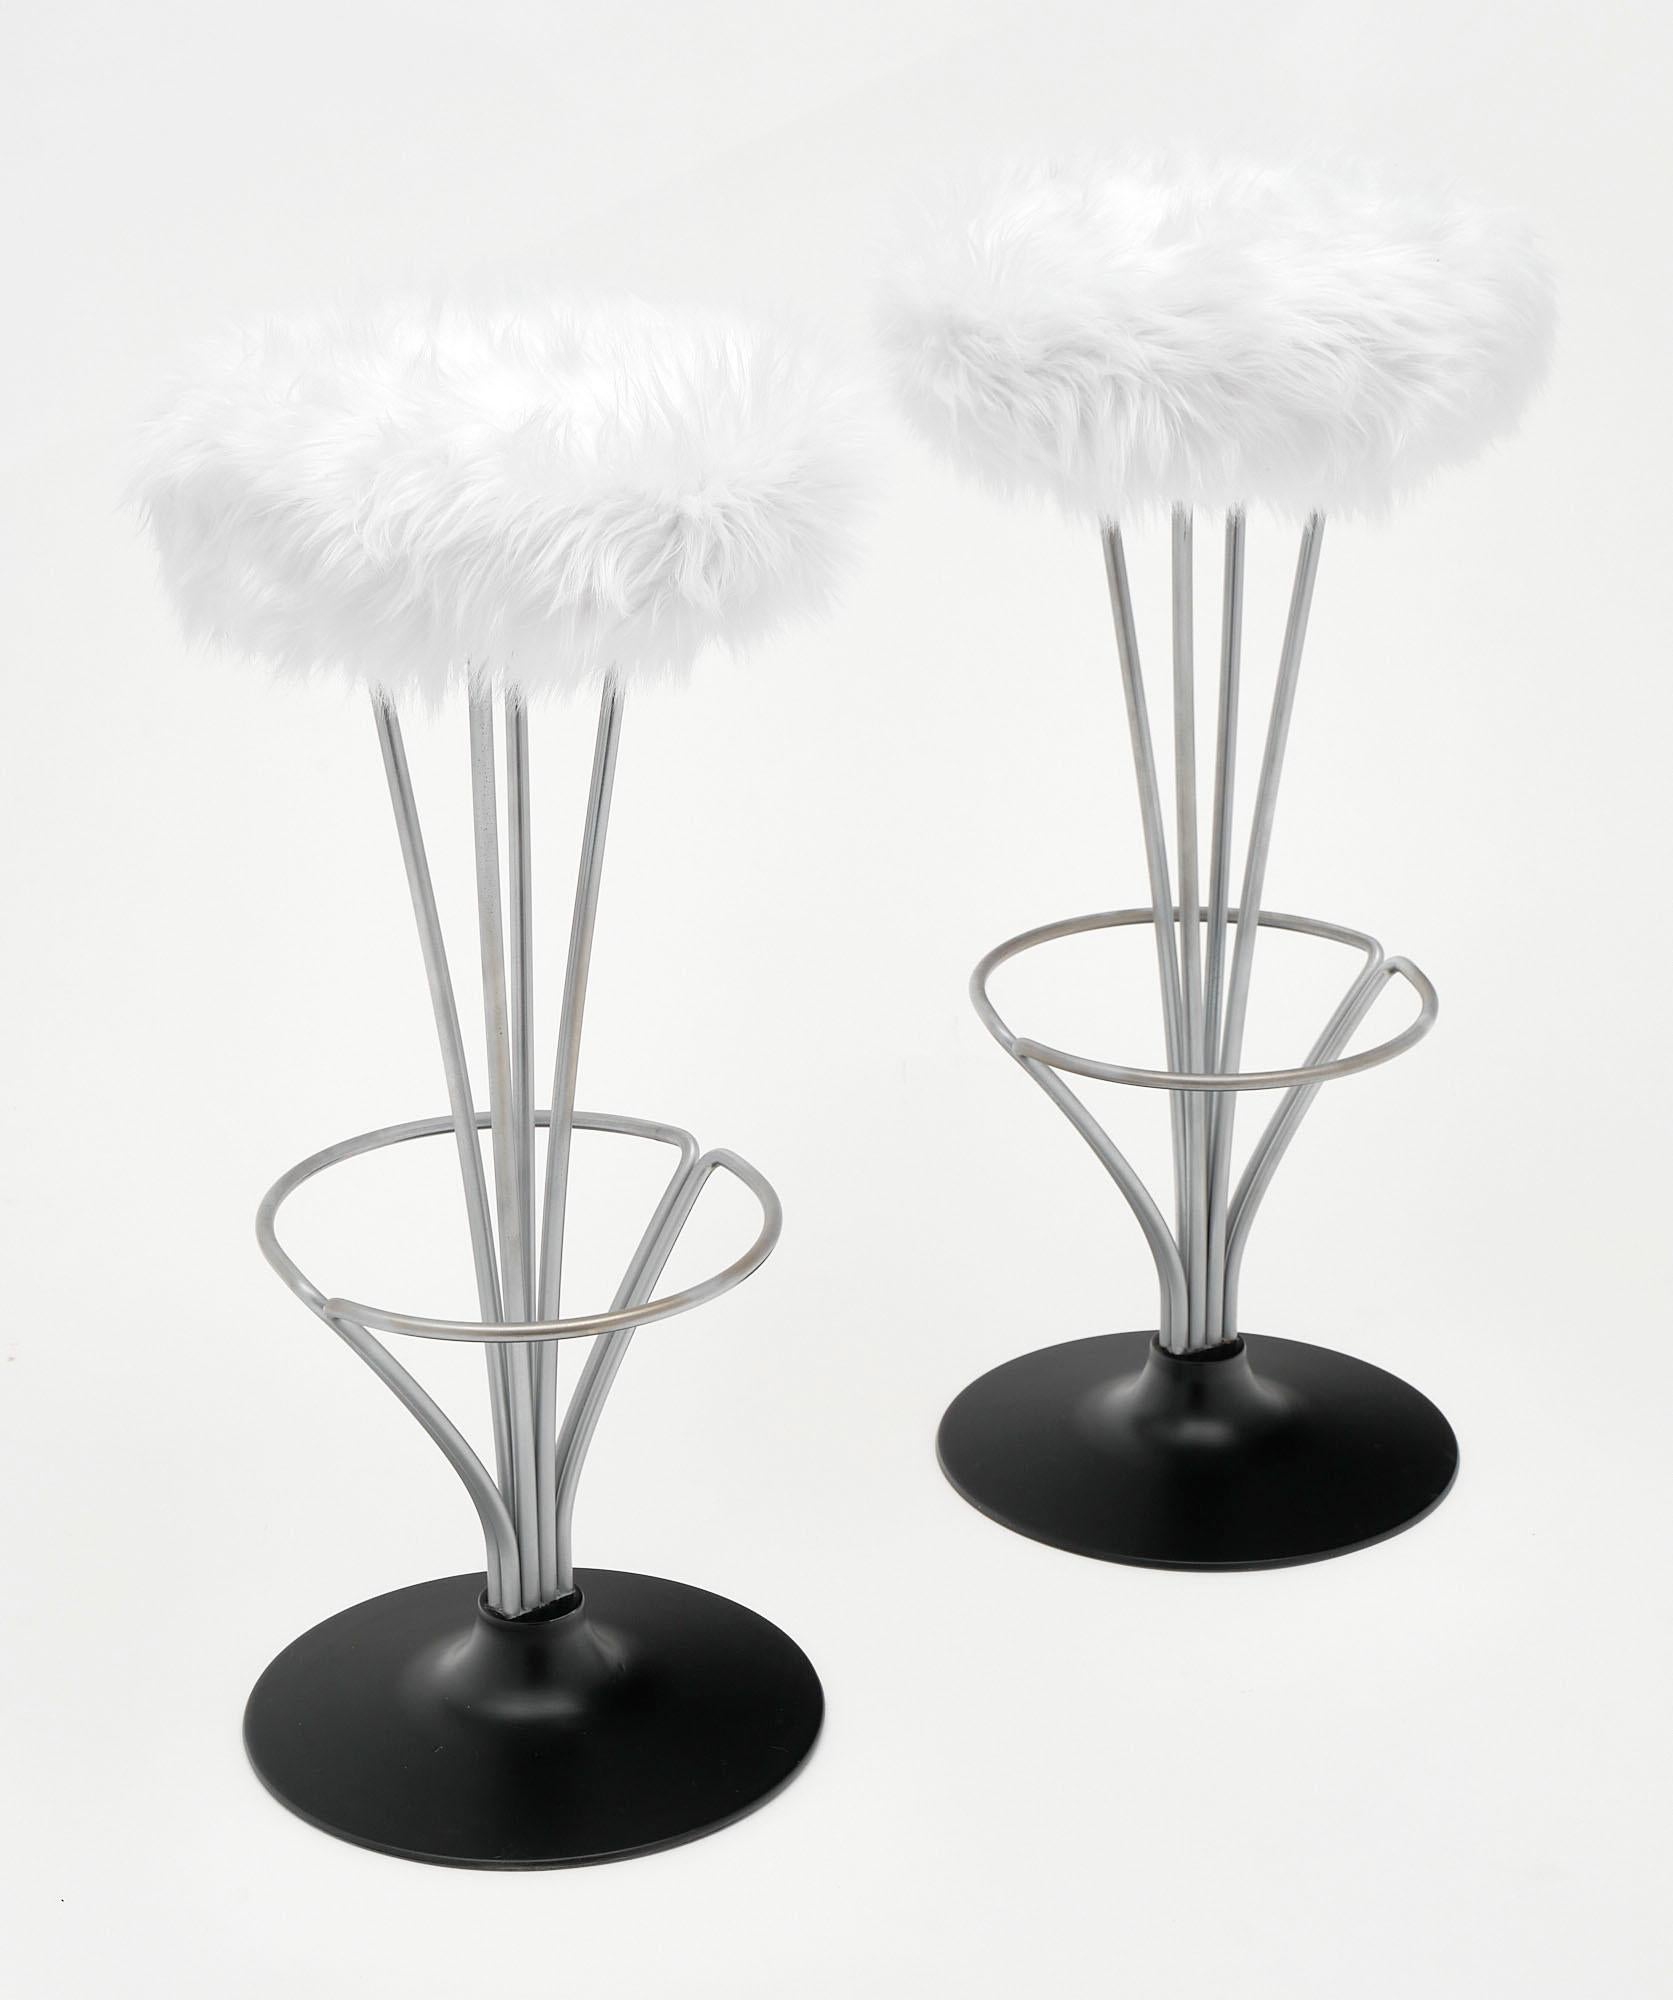 Bar stools from France in the Modernist style. We love the strong construction of the steel bases and black lacquered feet. Each features a foot rest and has been newly reupholstered in a white shag fabric.